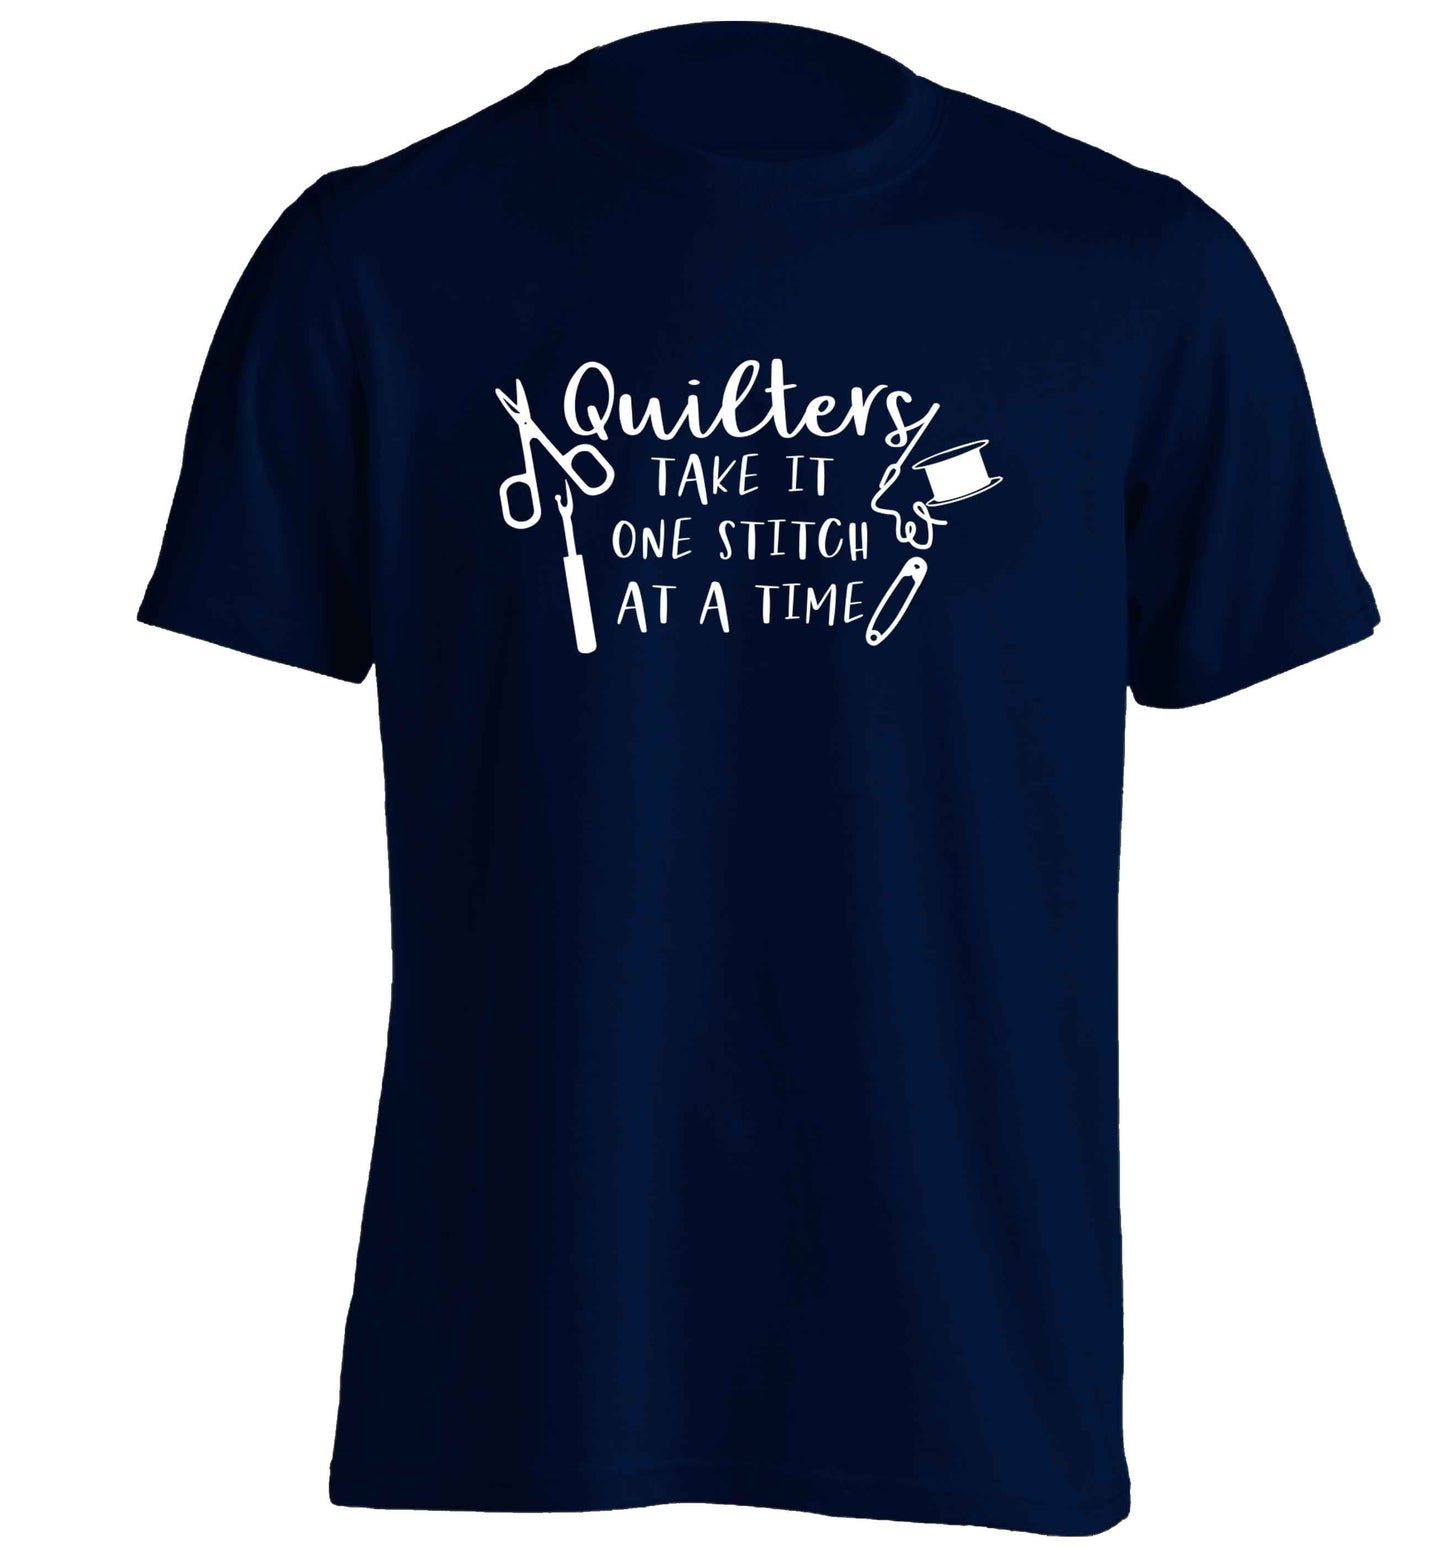 Quilters take it one stitch at a time  adults unisex navy Tshirt 2XL